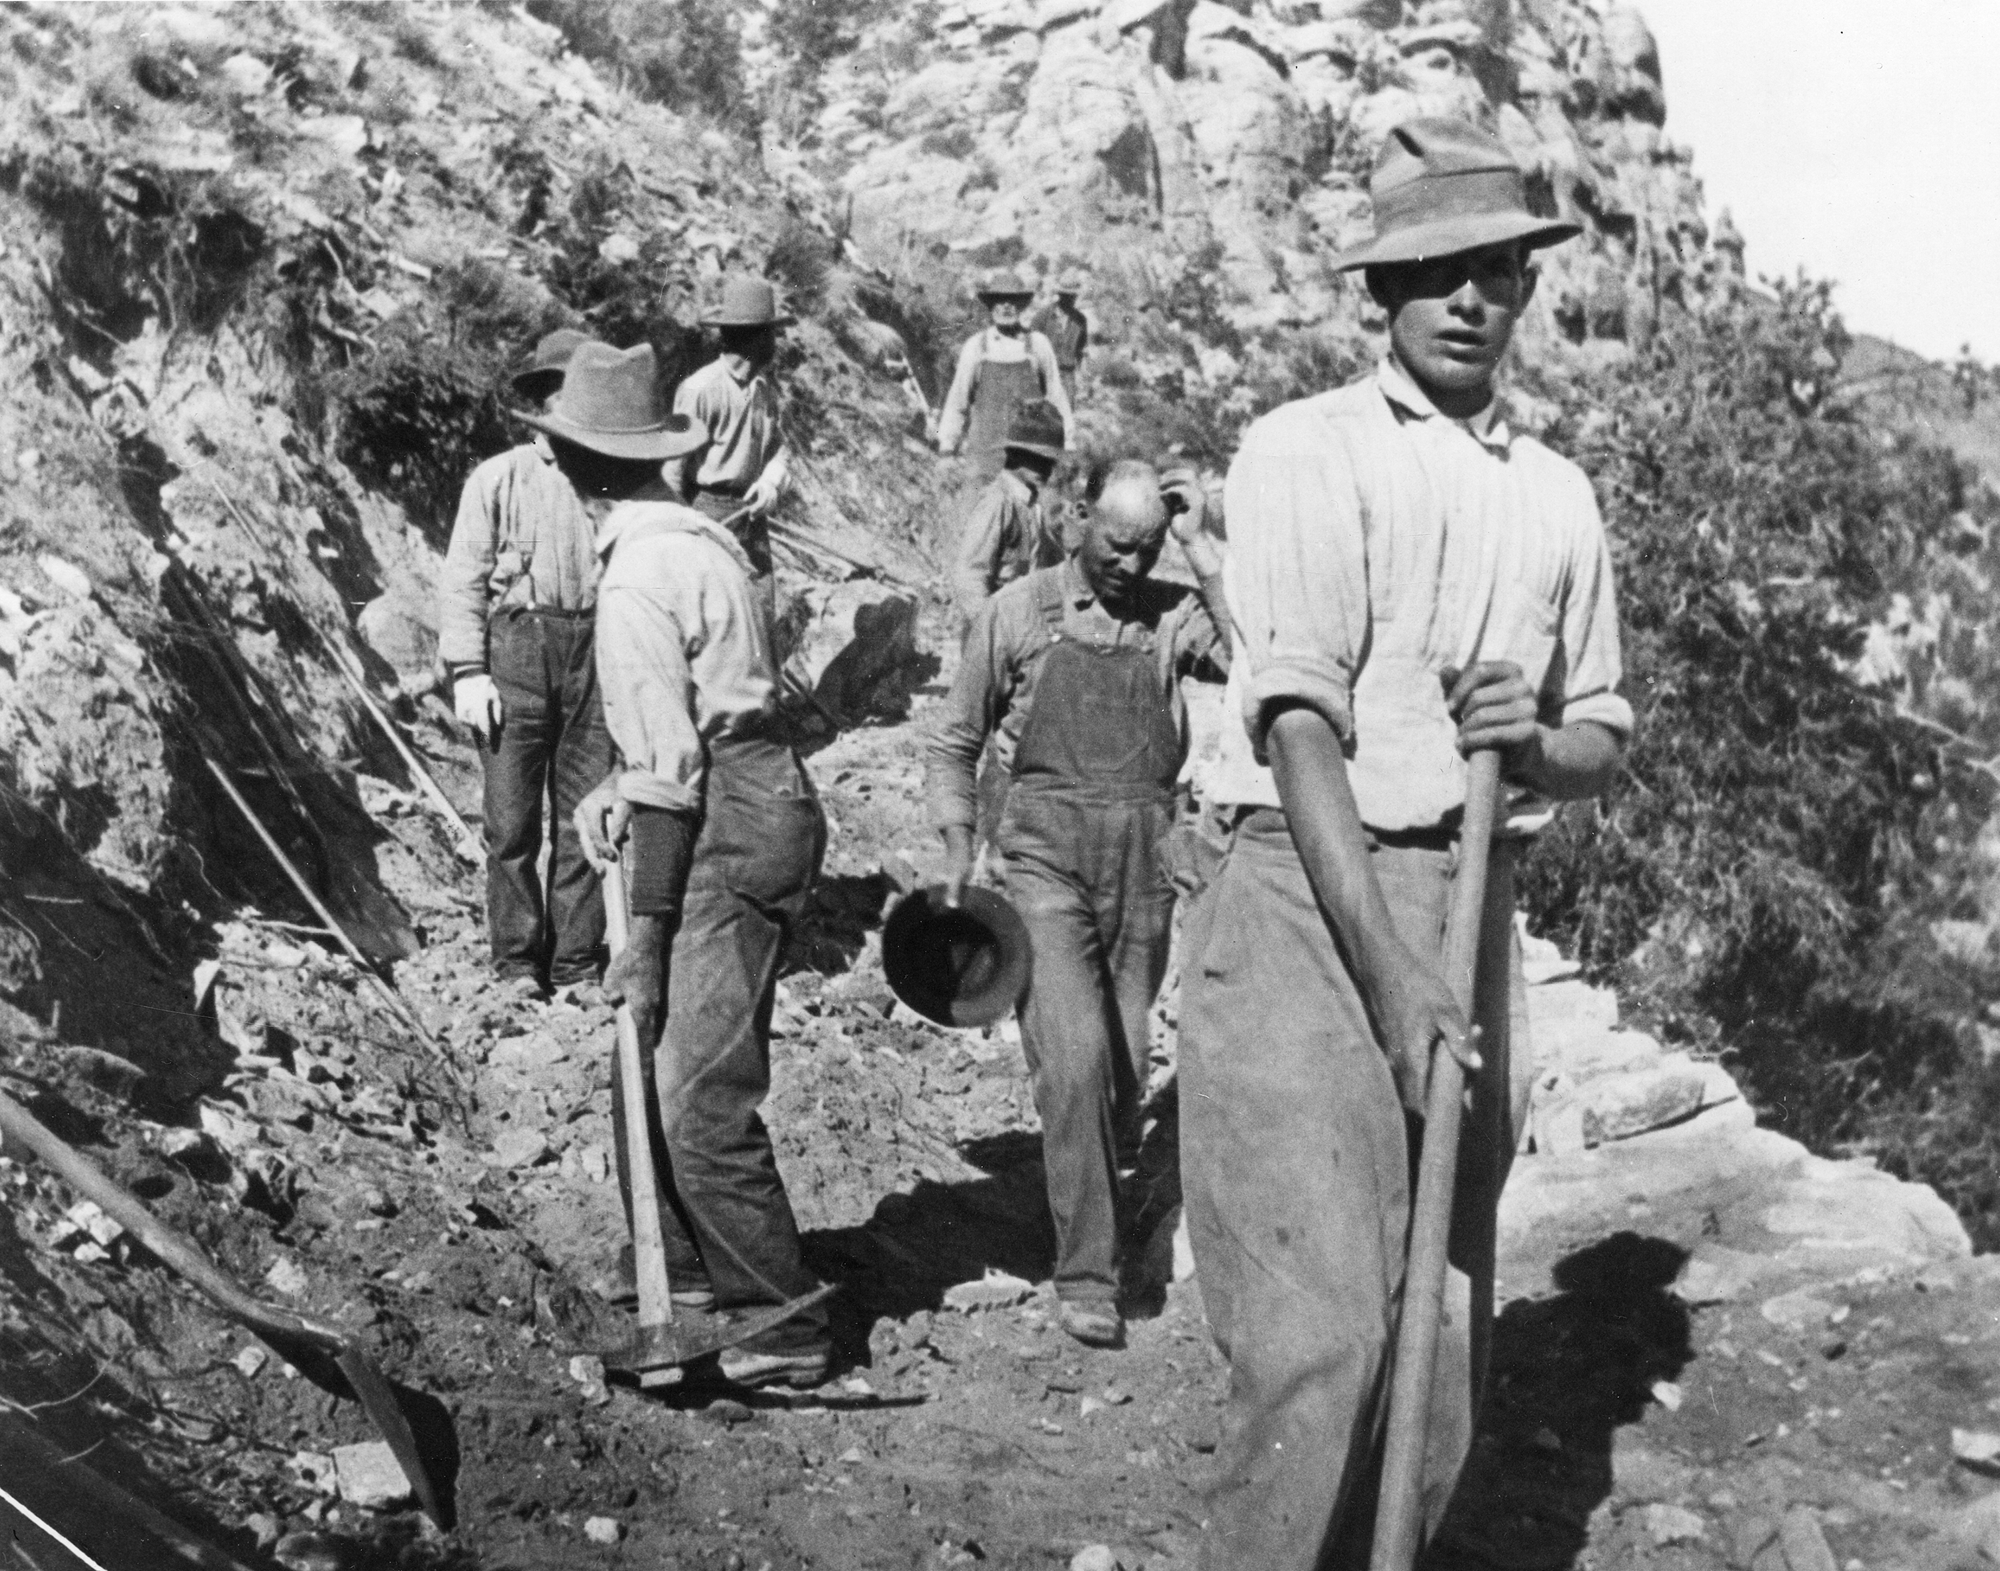 Civilian Conservation Corps (CCC) workers constructing a road in the Colorado mountains, 1930s.